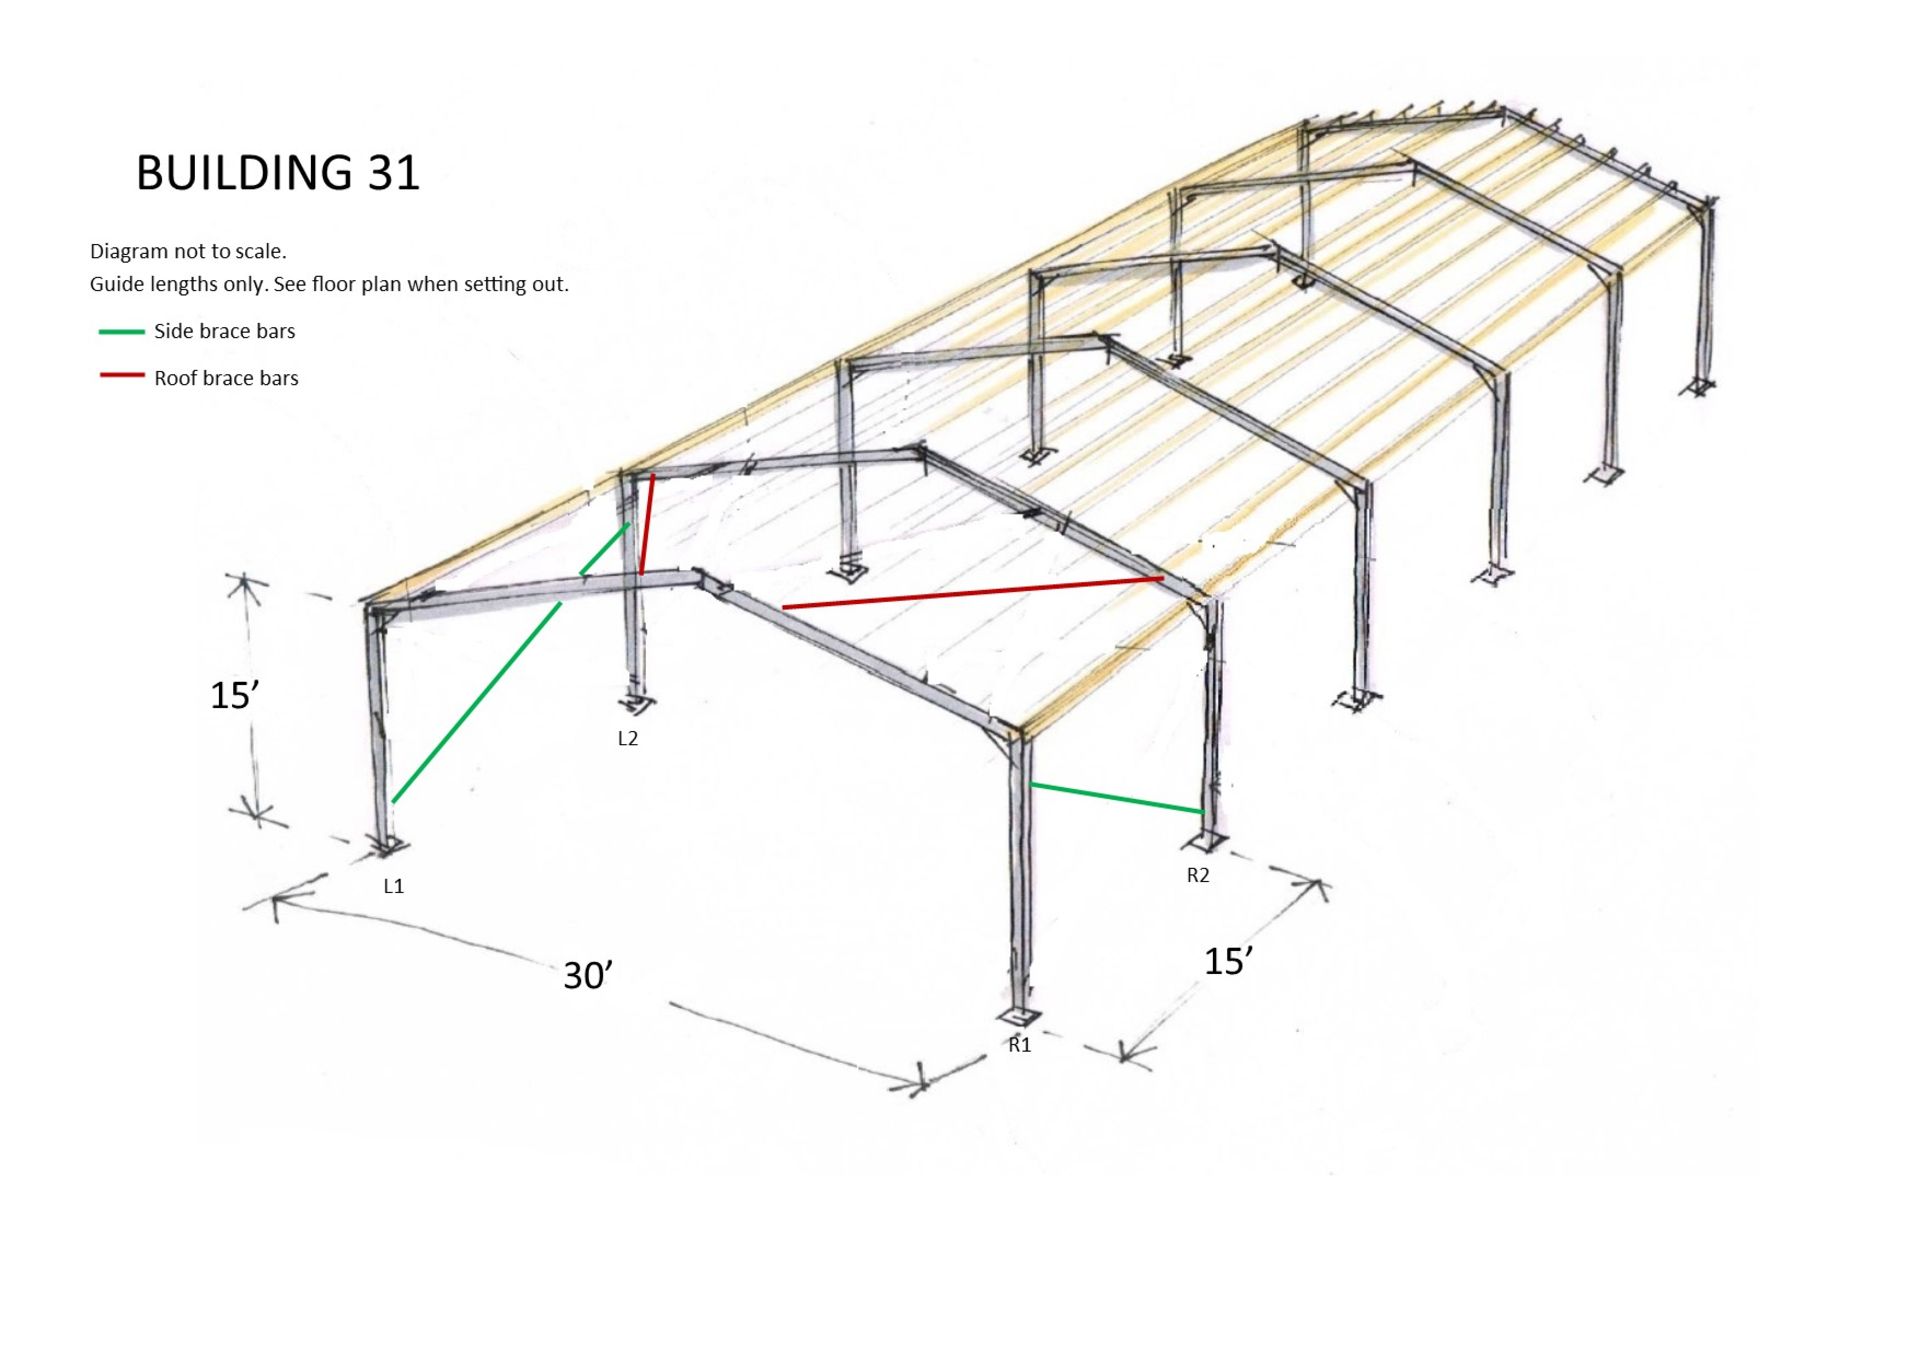 Apex Steel Framework on 15ft bays, with Purlins and Fixings. 75ft long x 30ft wide x 15ft @ eaves - Image 8 of 10